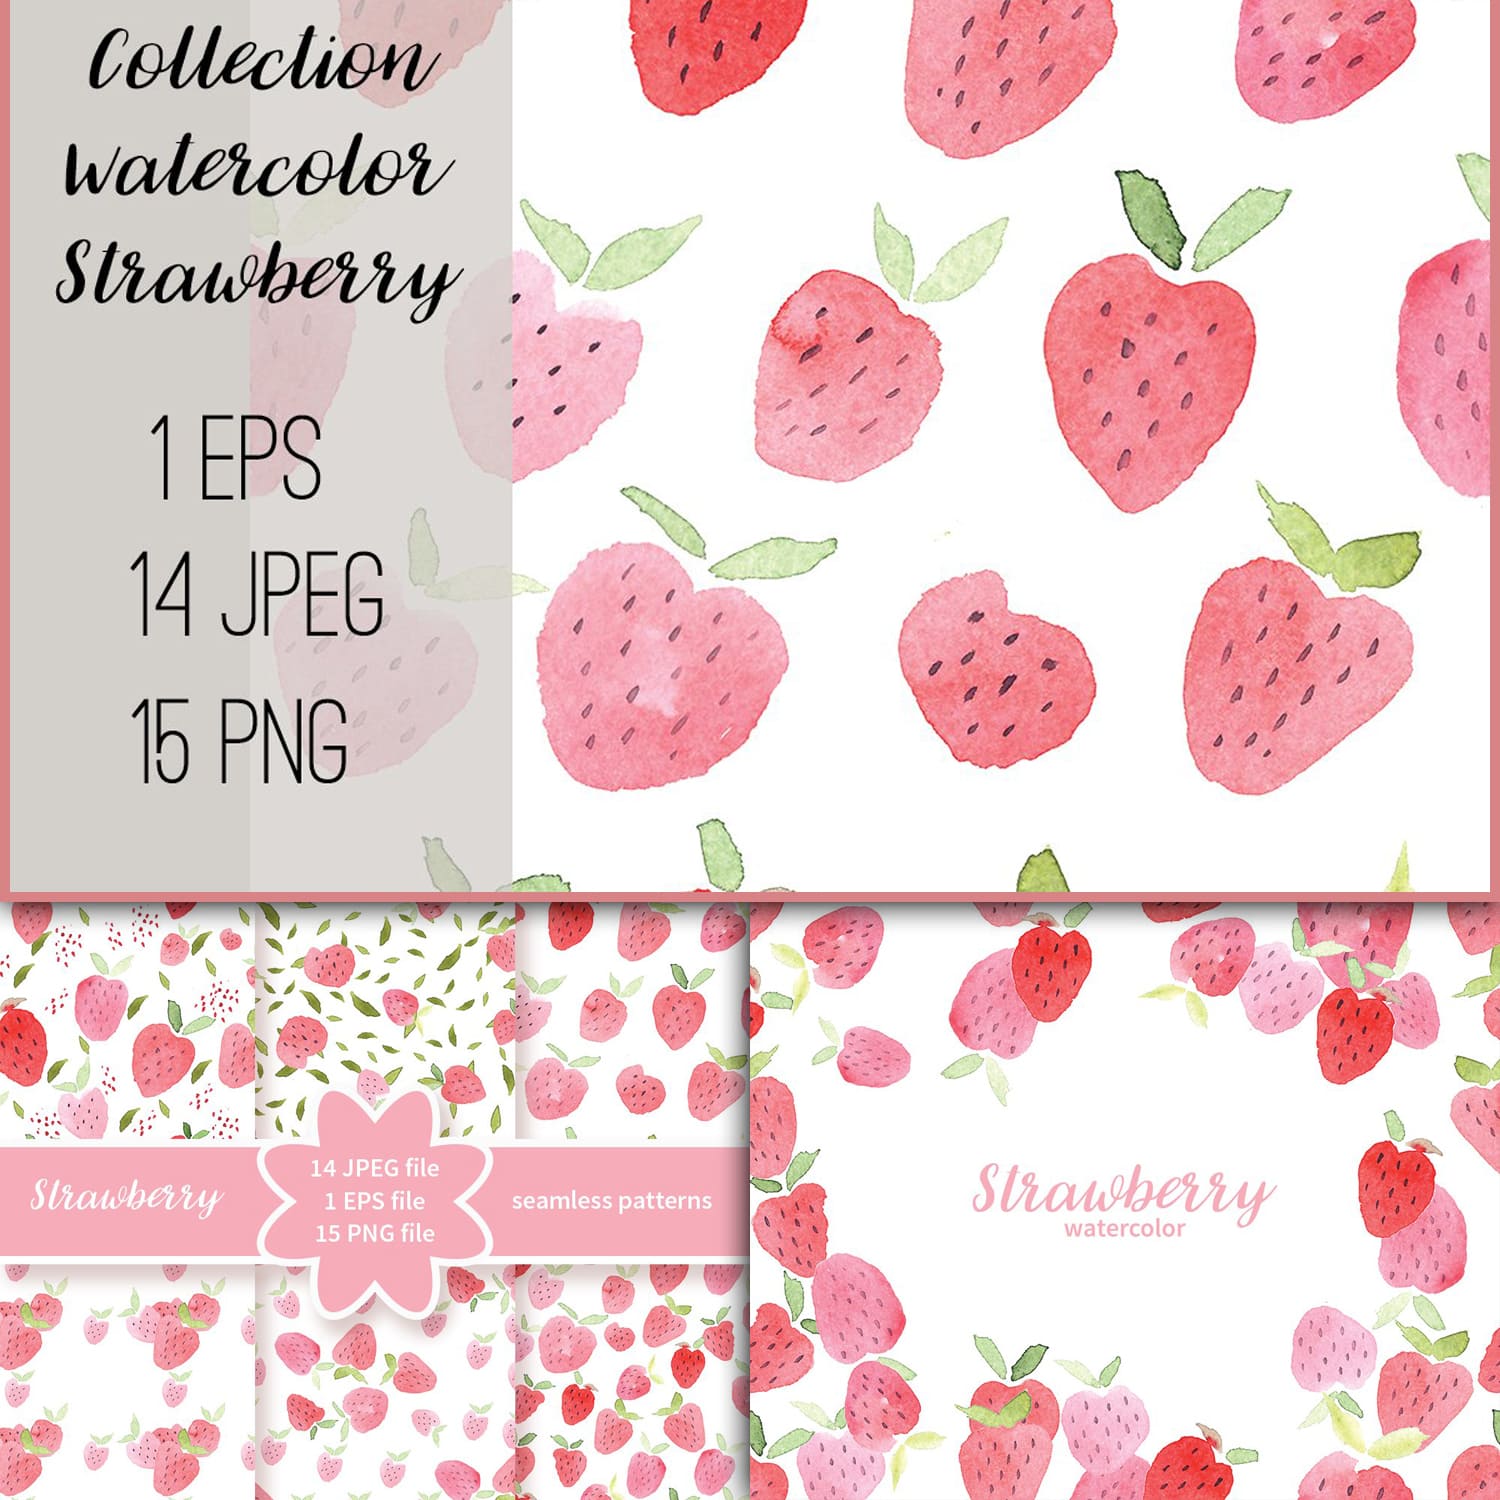 Slides from the collection of watercolor strawberries.